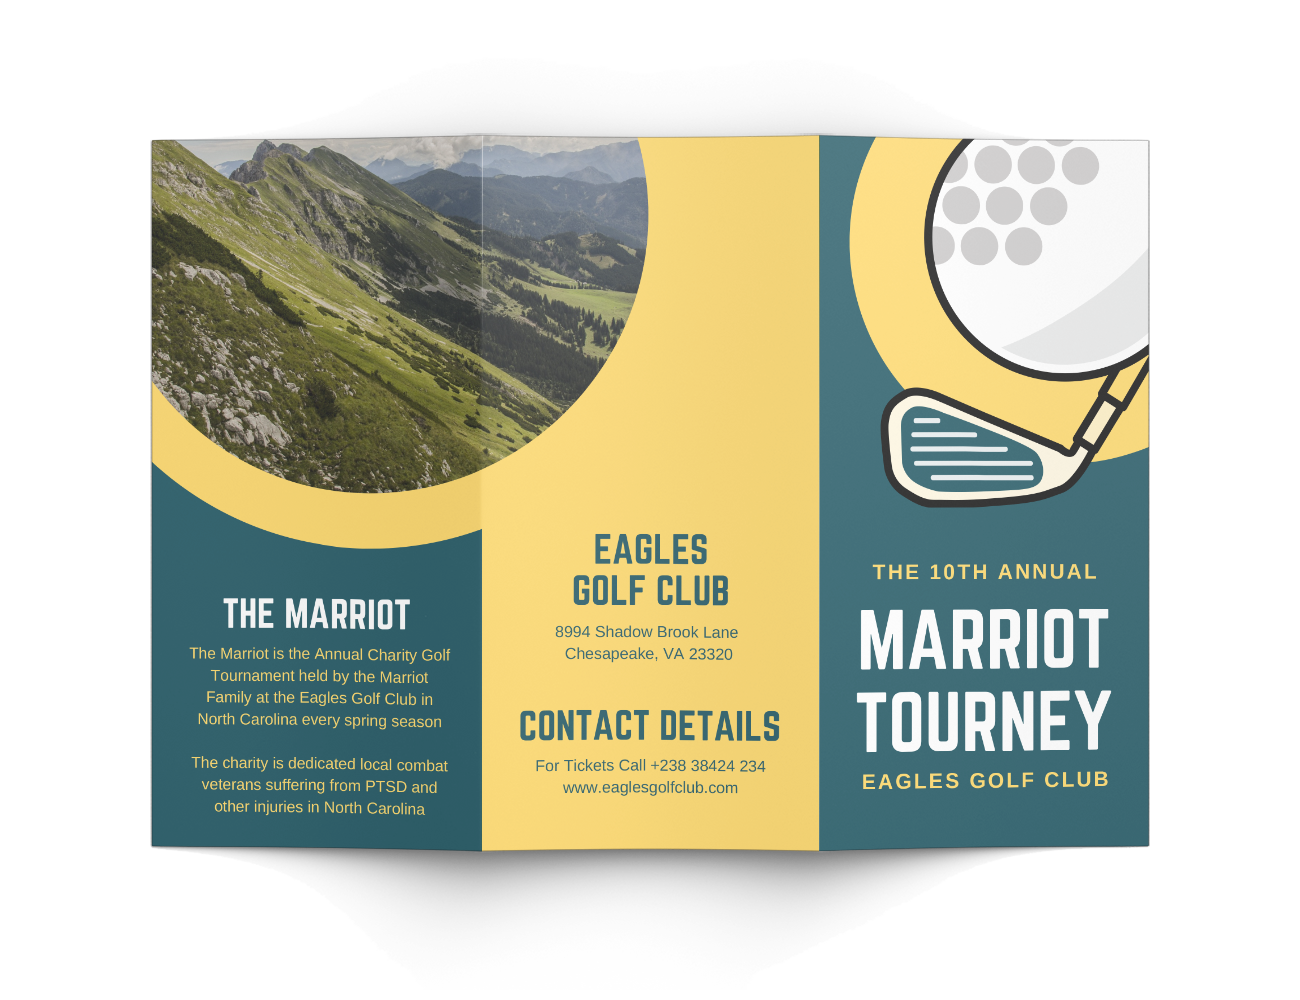 Sports event brochure examples and templates.